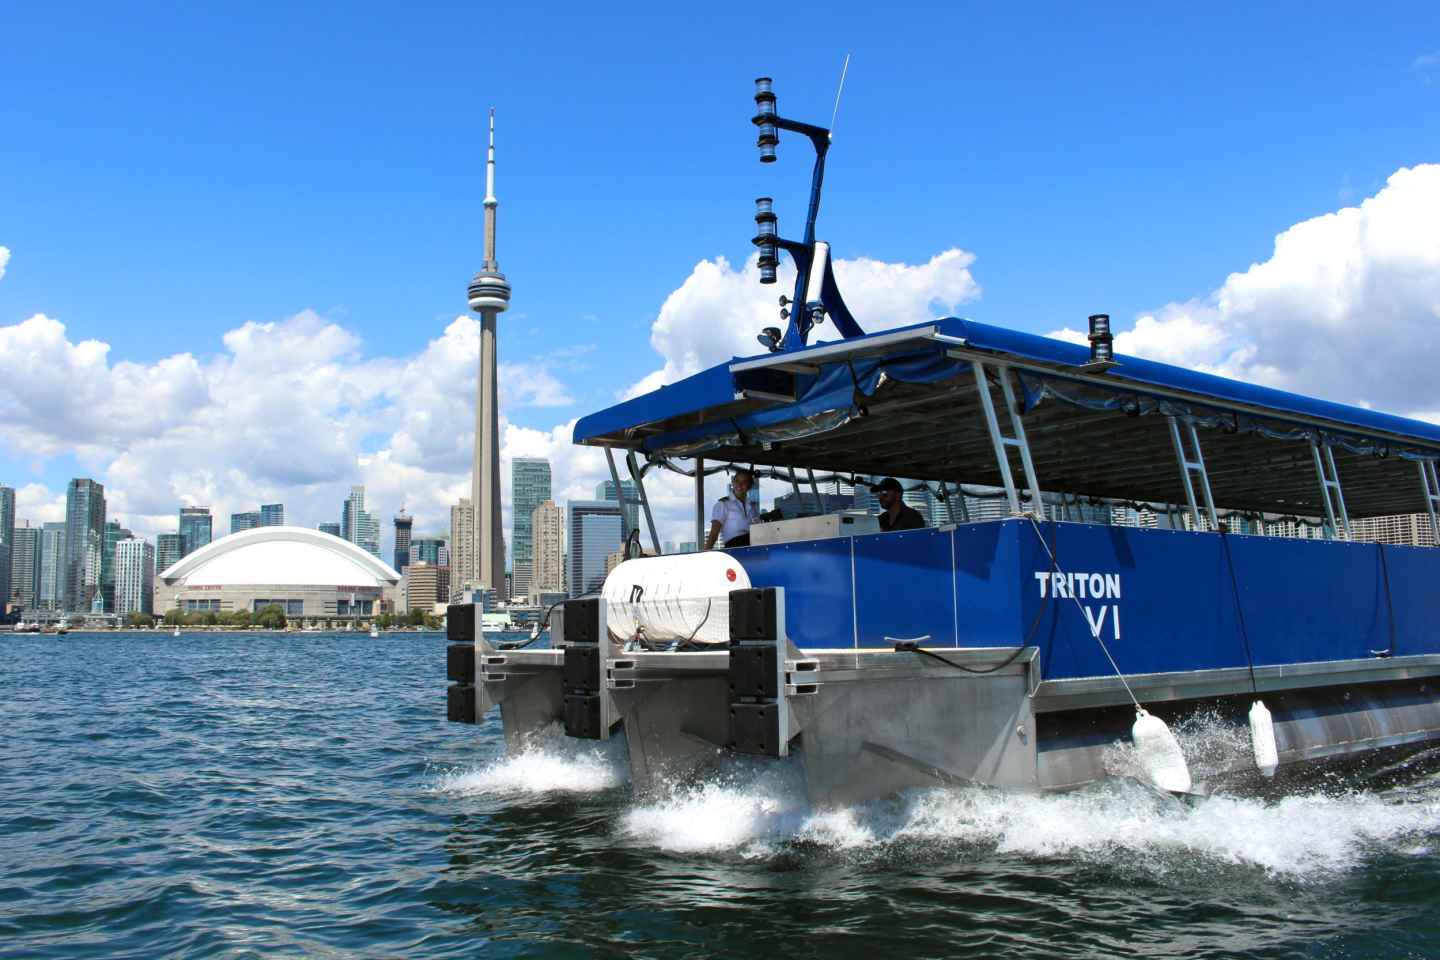 city sightseeing toronto boat tour schedule